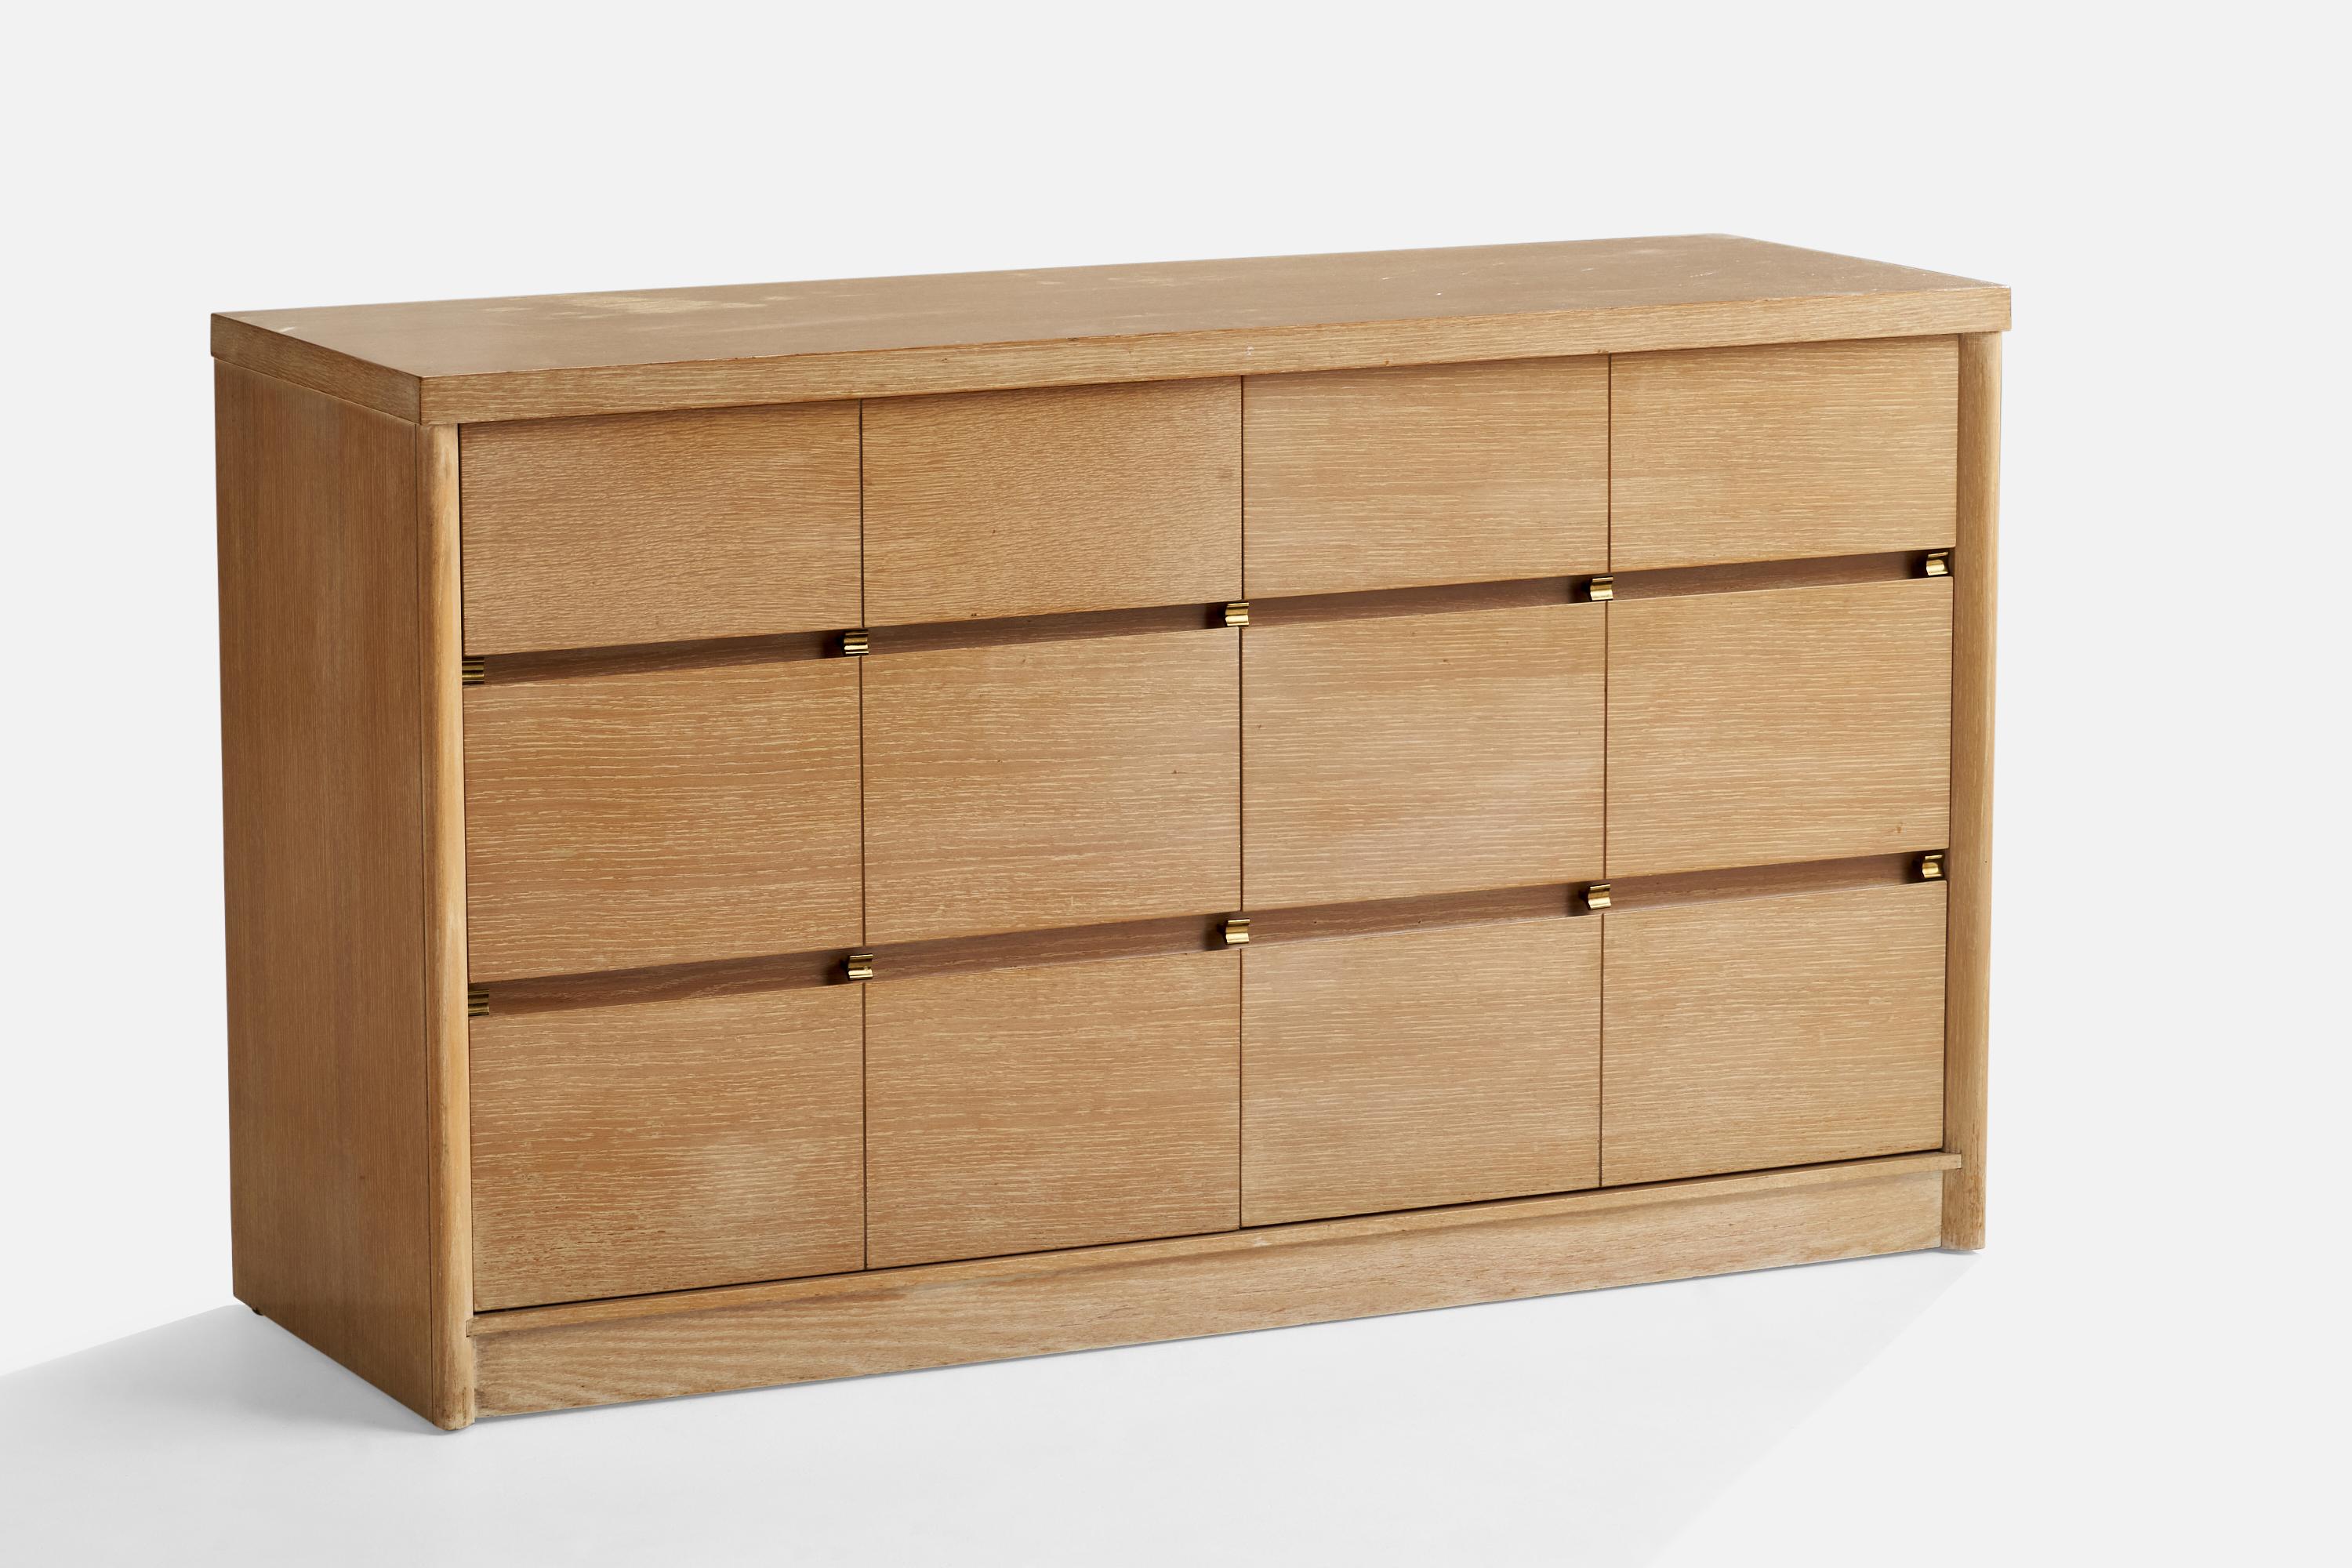 A an oak and brass dresser designed by Raymond Loewy and produced by Mengel Furniture Company, c. 1950s.